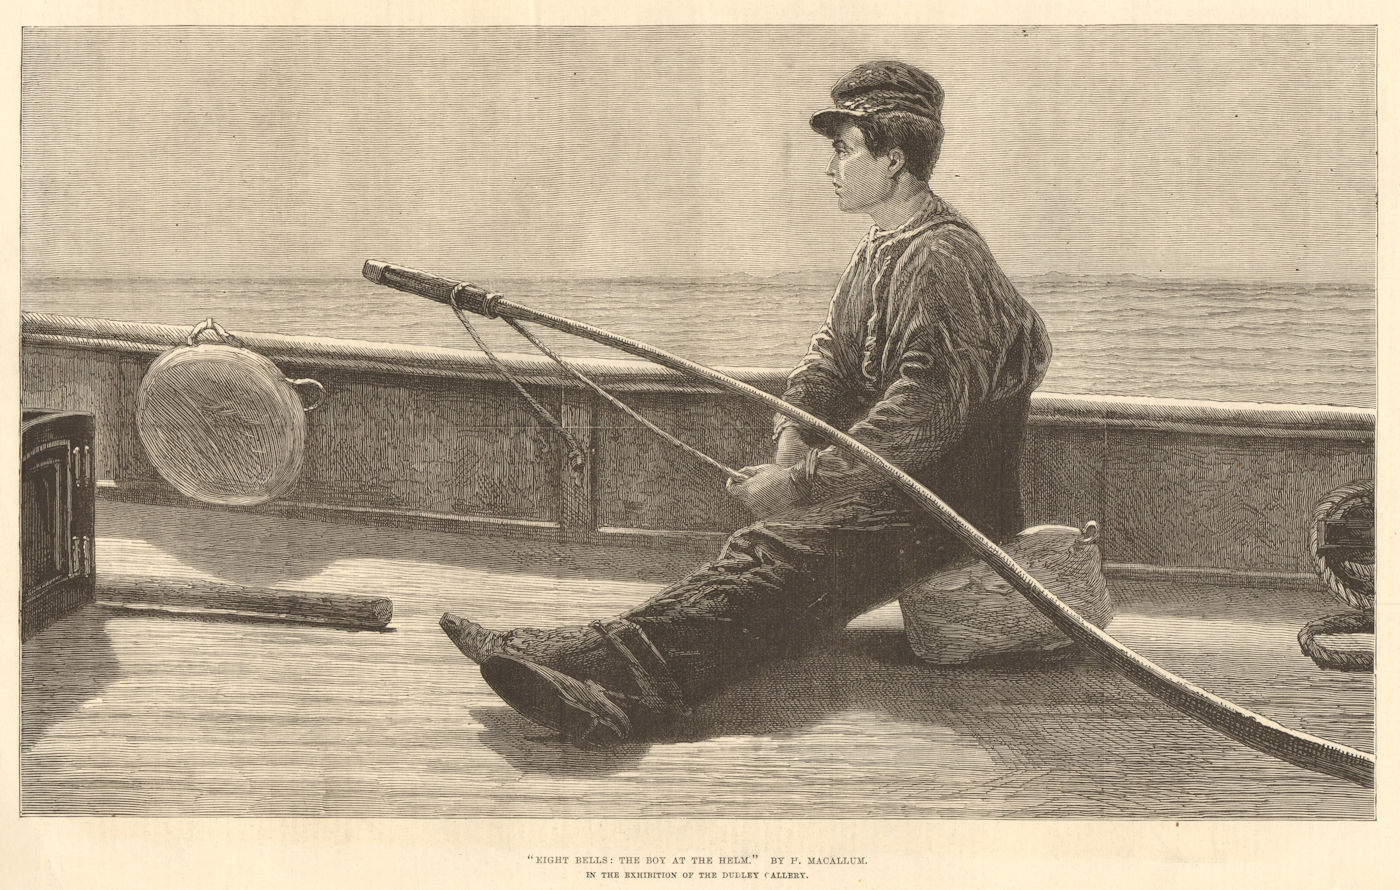 Associate Product "Eight bells: The boy at the helm", by H. Macallum. Boats. Children 1876 print